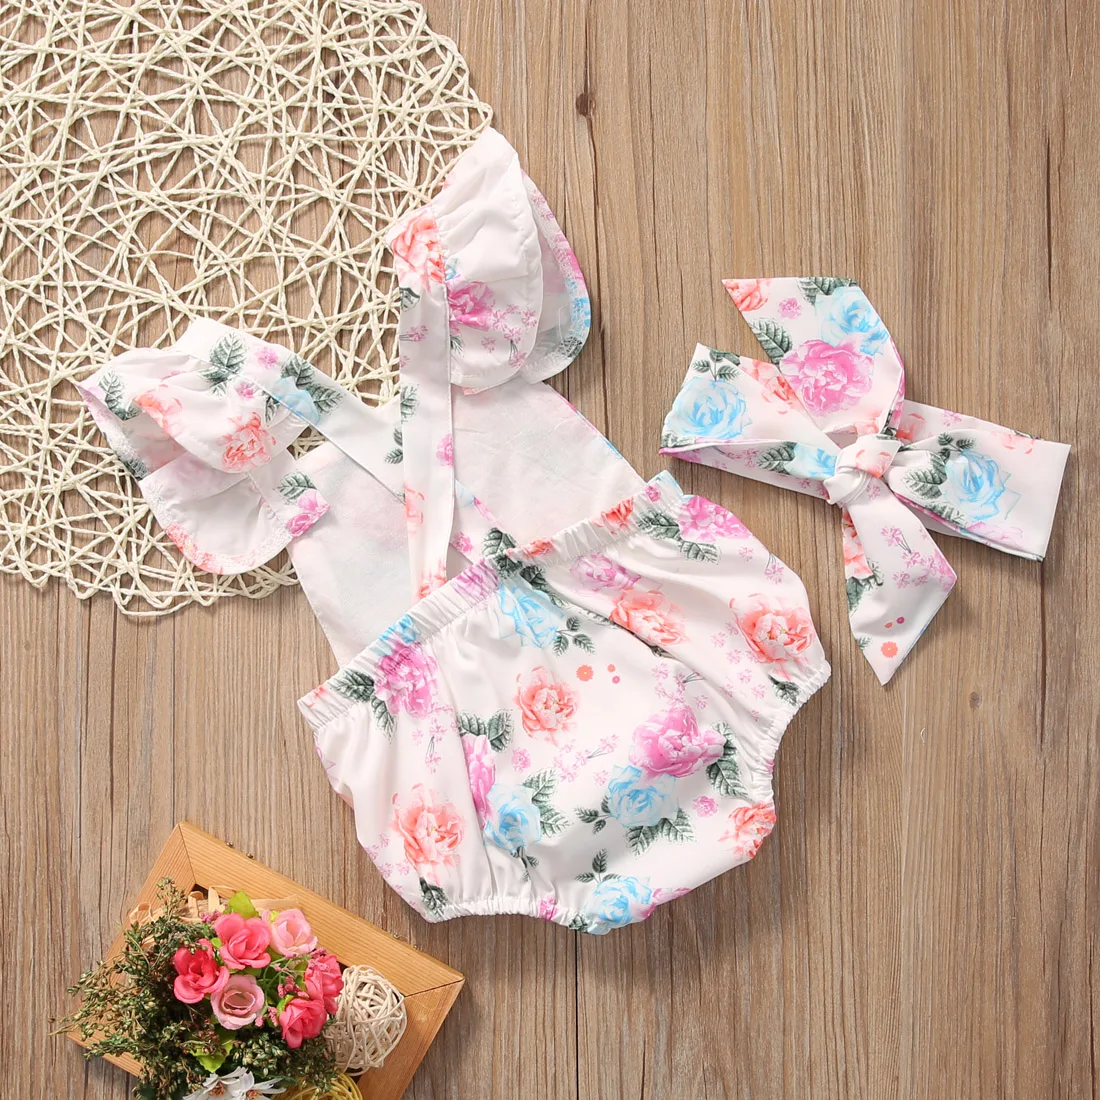 2017-Cute-Floral-Infant-Baby-Girls-Summer-Flower-Romper-SunsuitHeadband-Cotton-Outfits-Set-Clothes-4